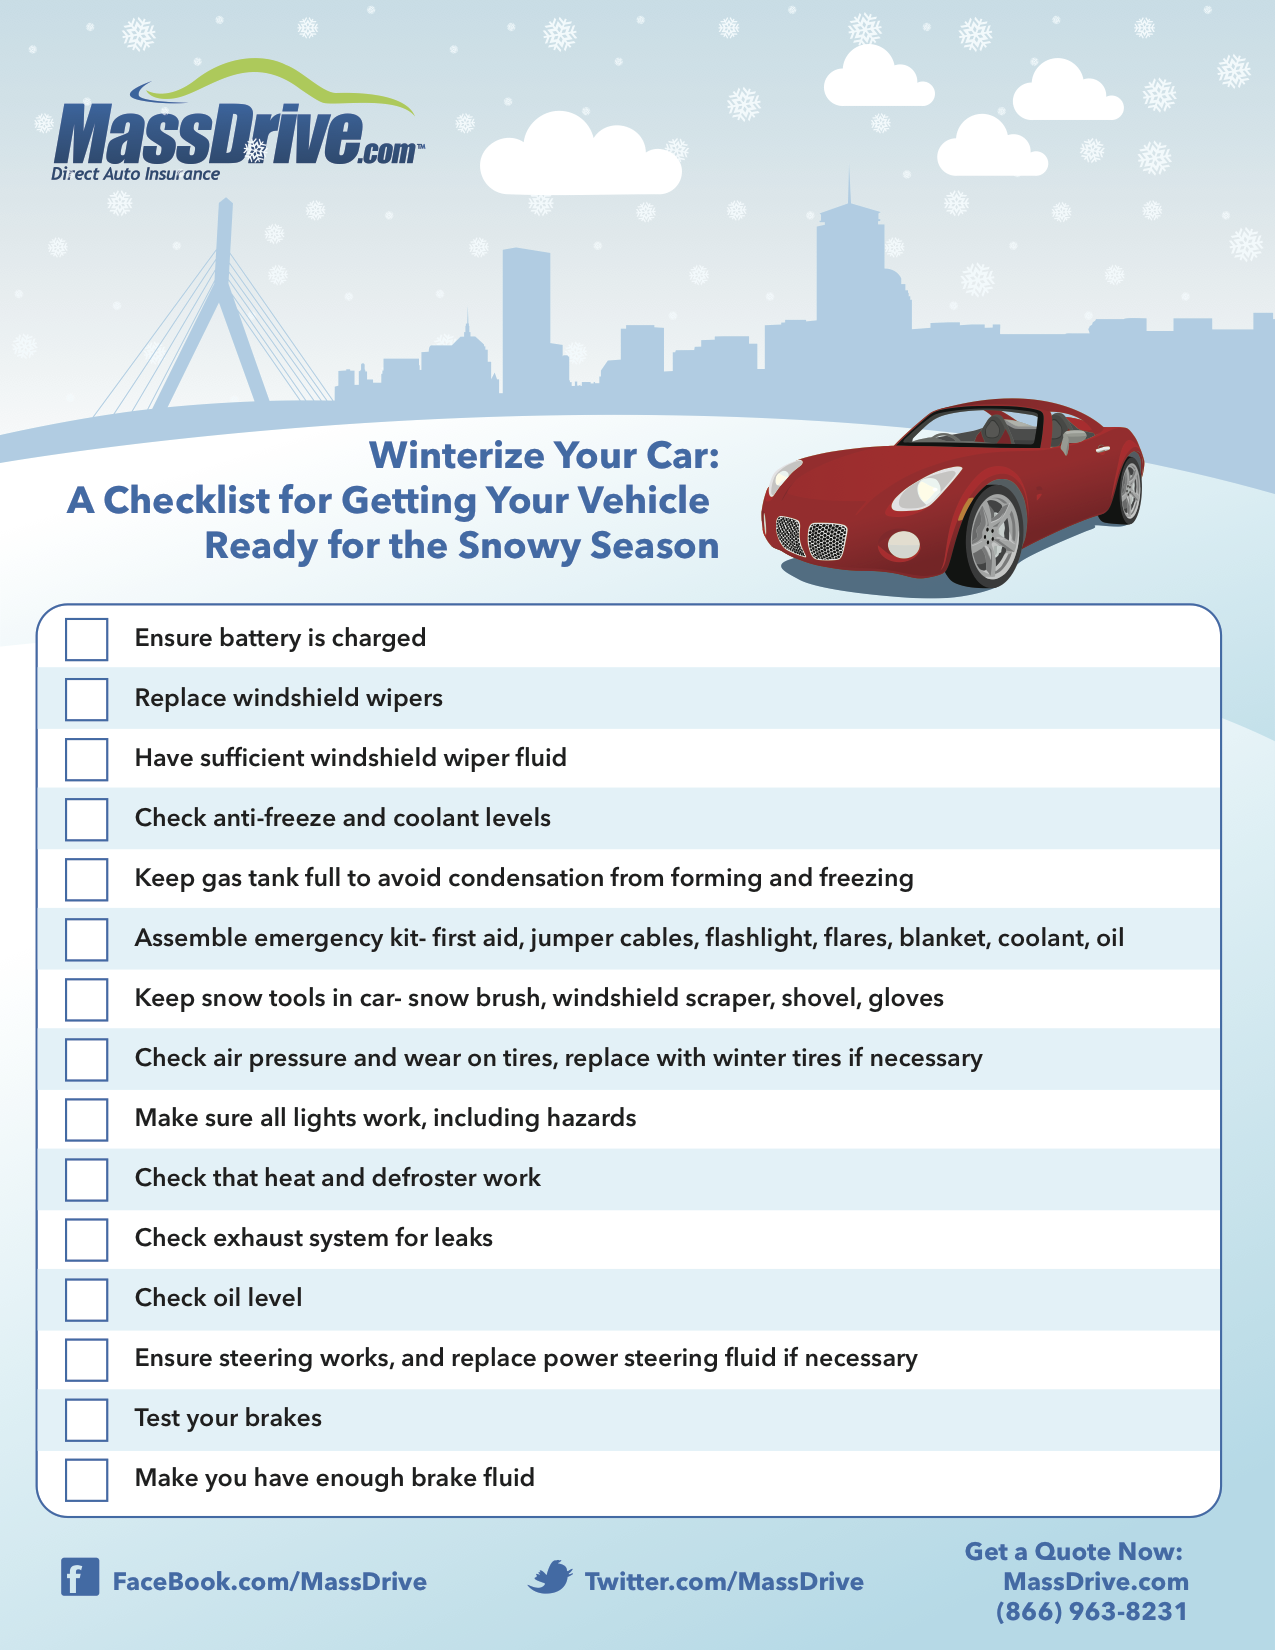 Winterize Your Car: A Checklist for Getting Your Vehicle Ready for ...